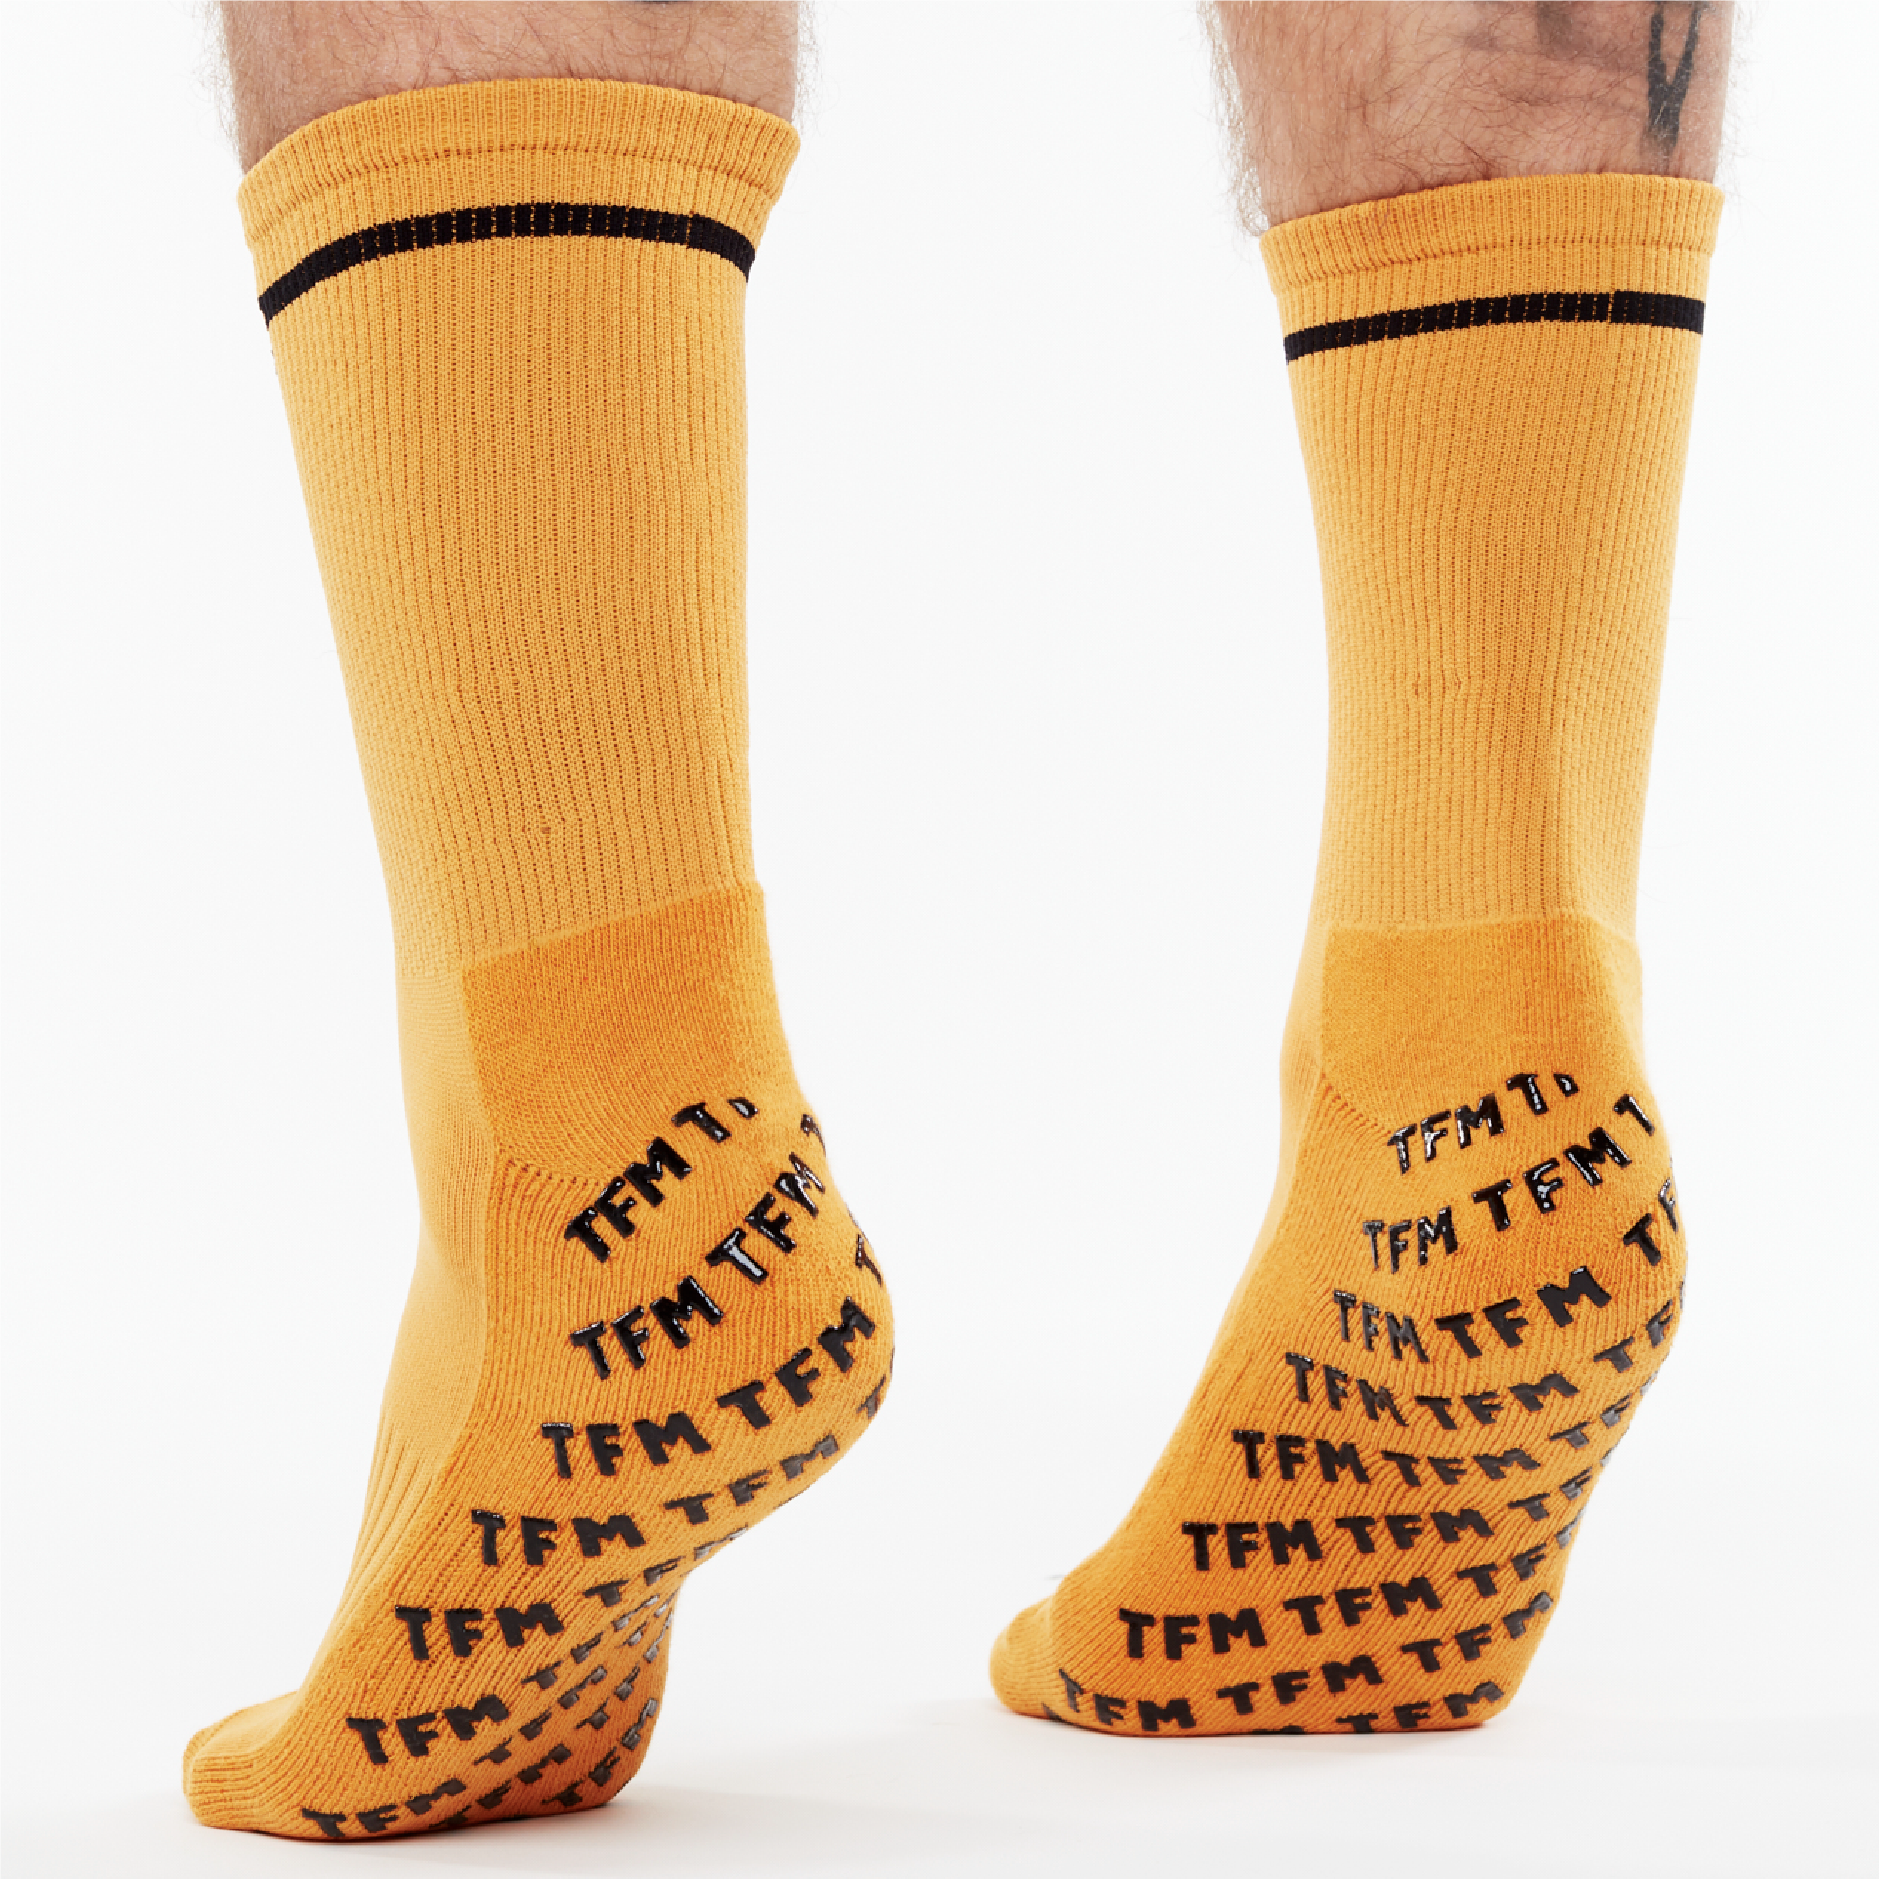 Shop your yellow Herzog PRO Compression Ankle Socks